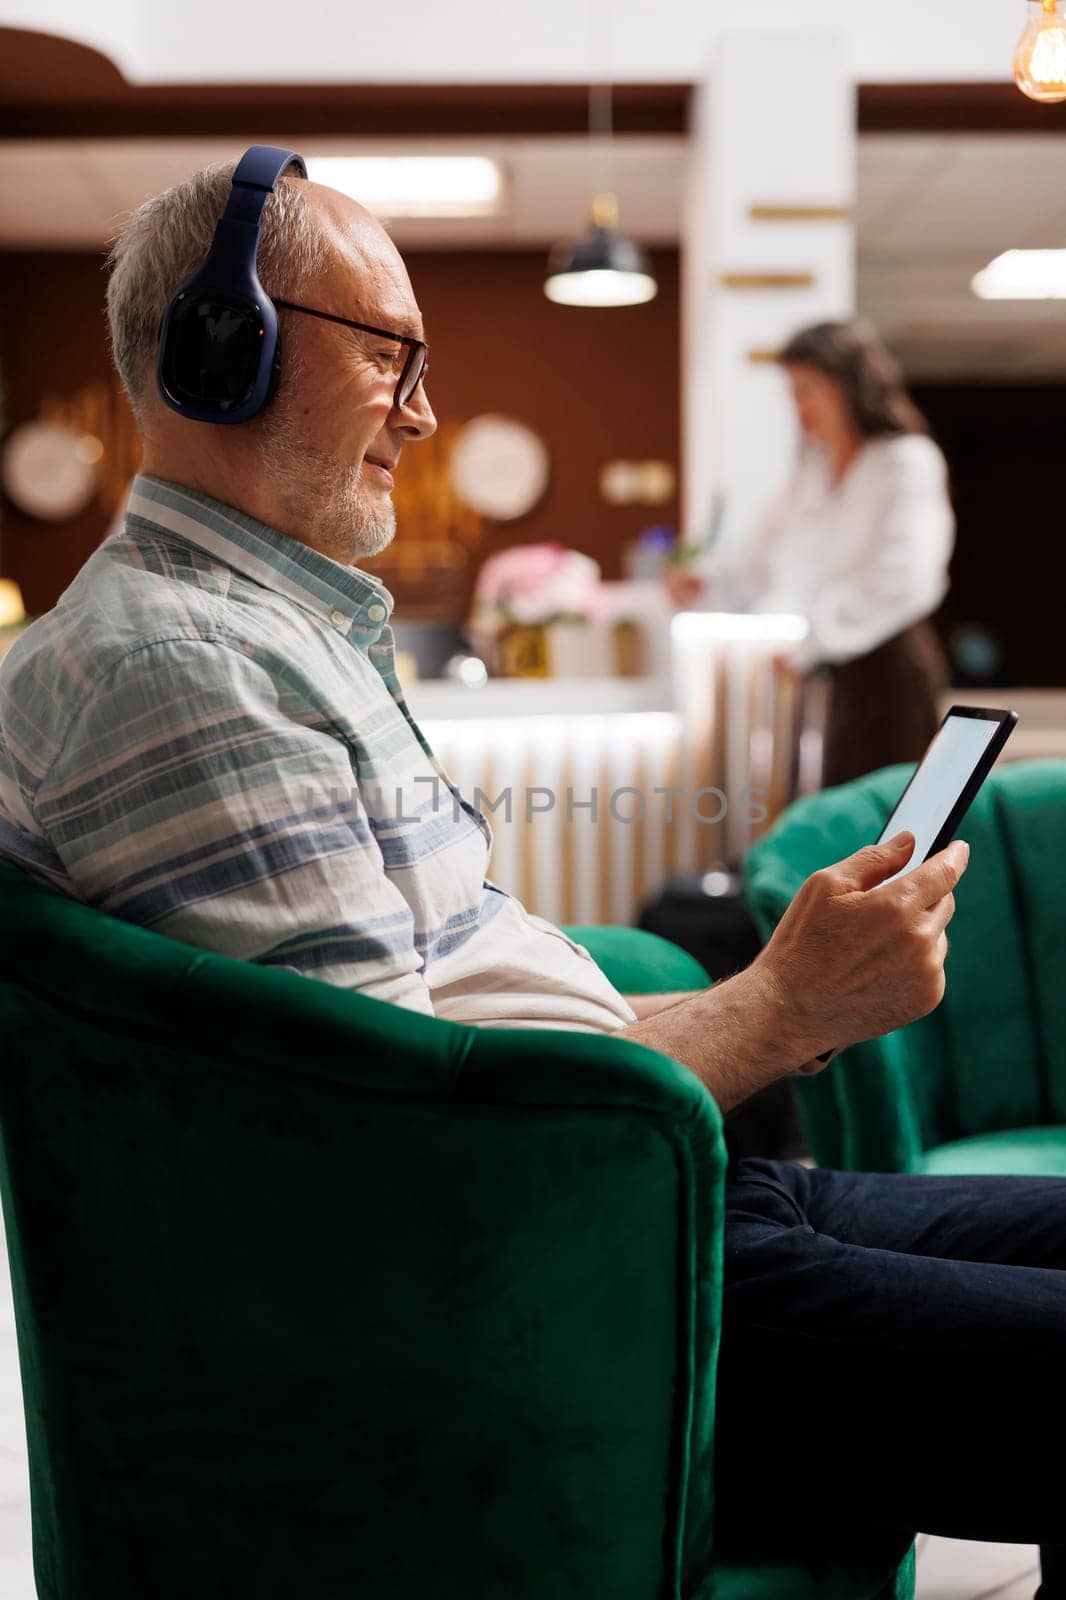 Elderly caucasian man wears headphones and sits on hotel lobby sofa grasping tablet. Senior male guest having wireless headset waits in lounge area and uses digital gadget to browse the internet.